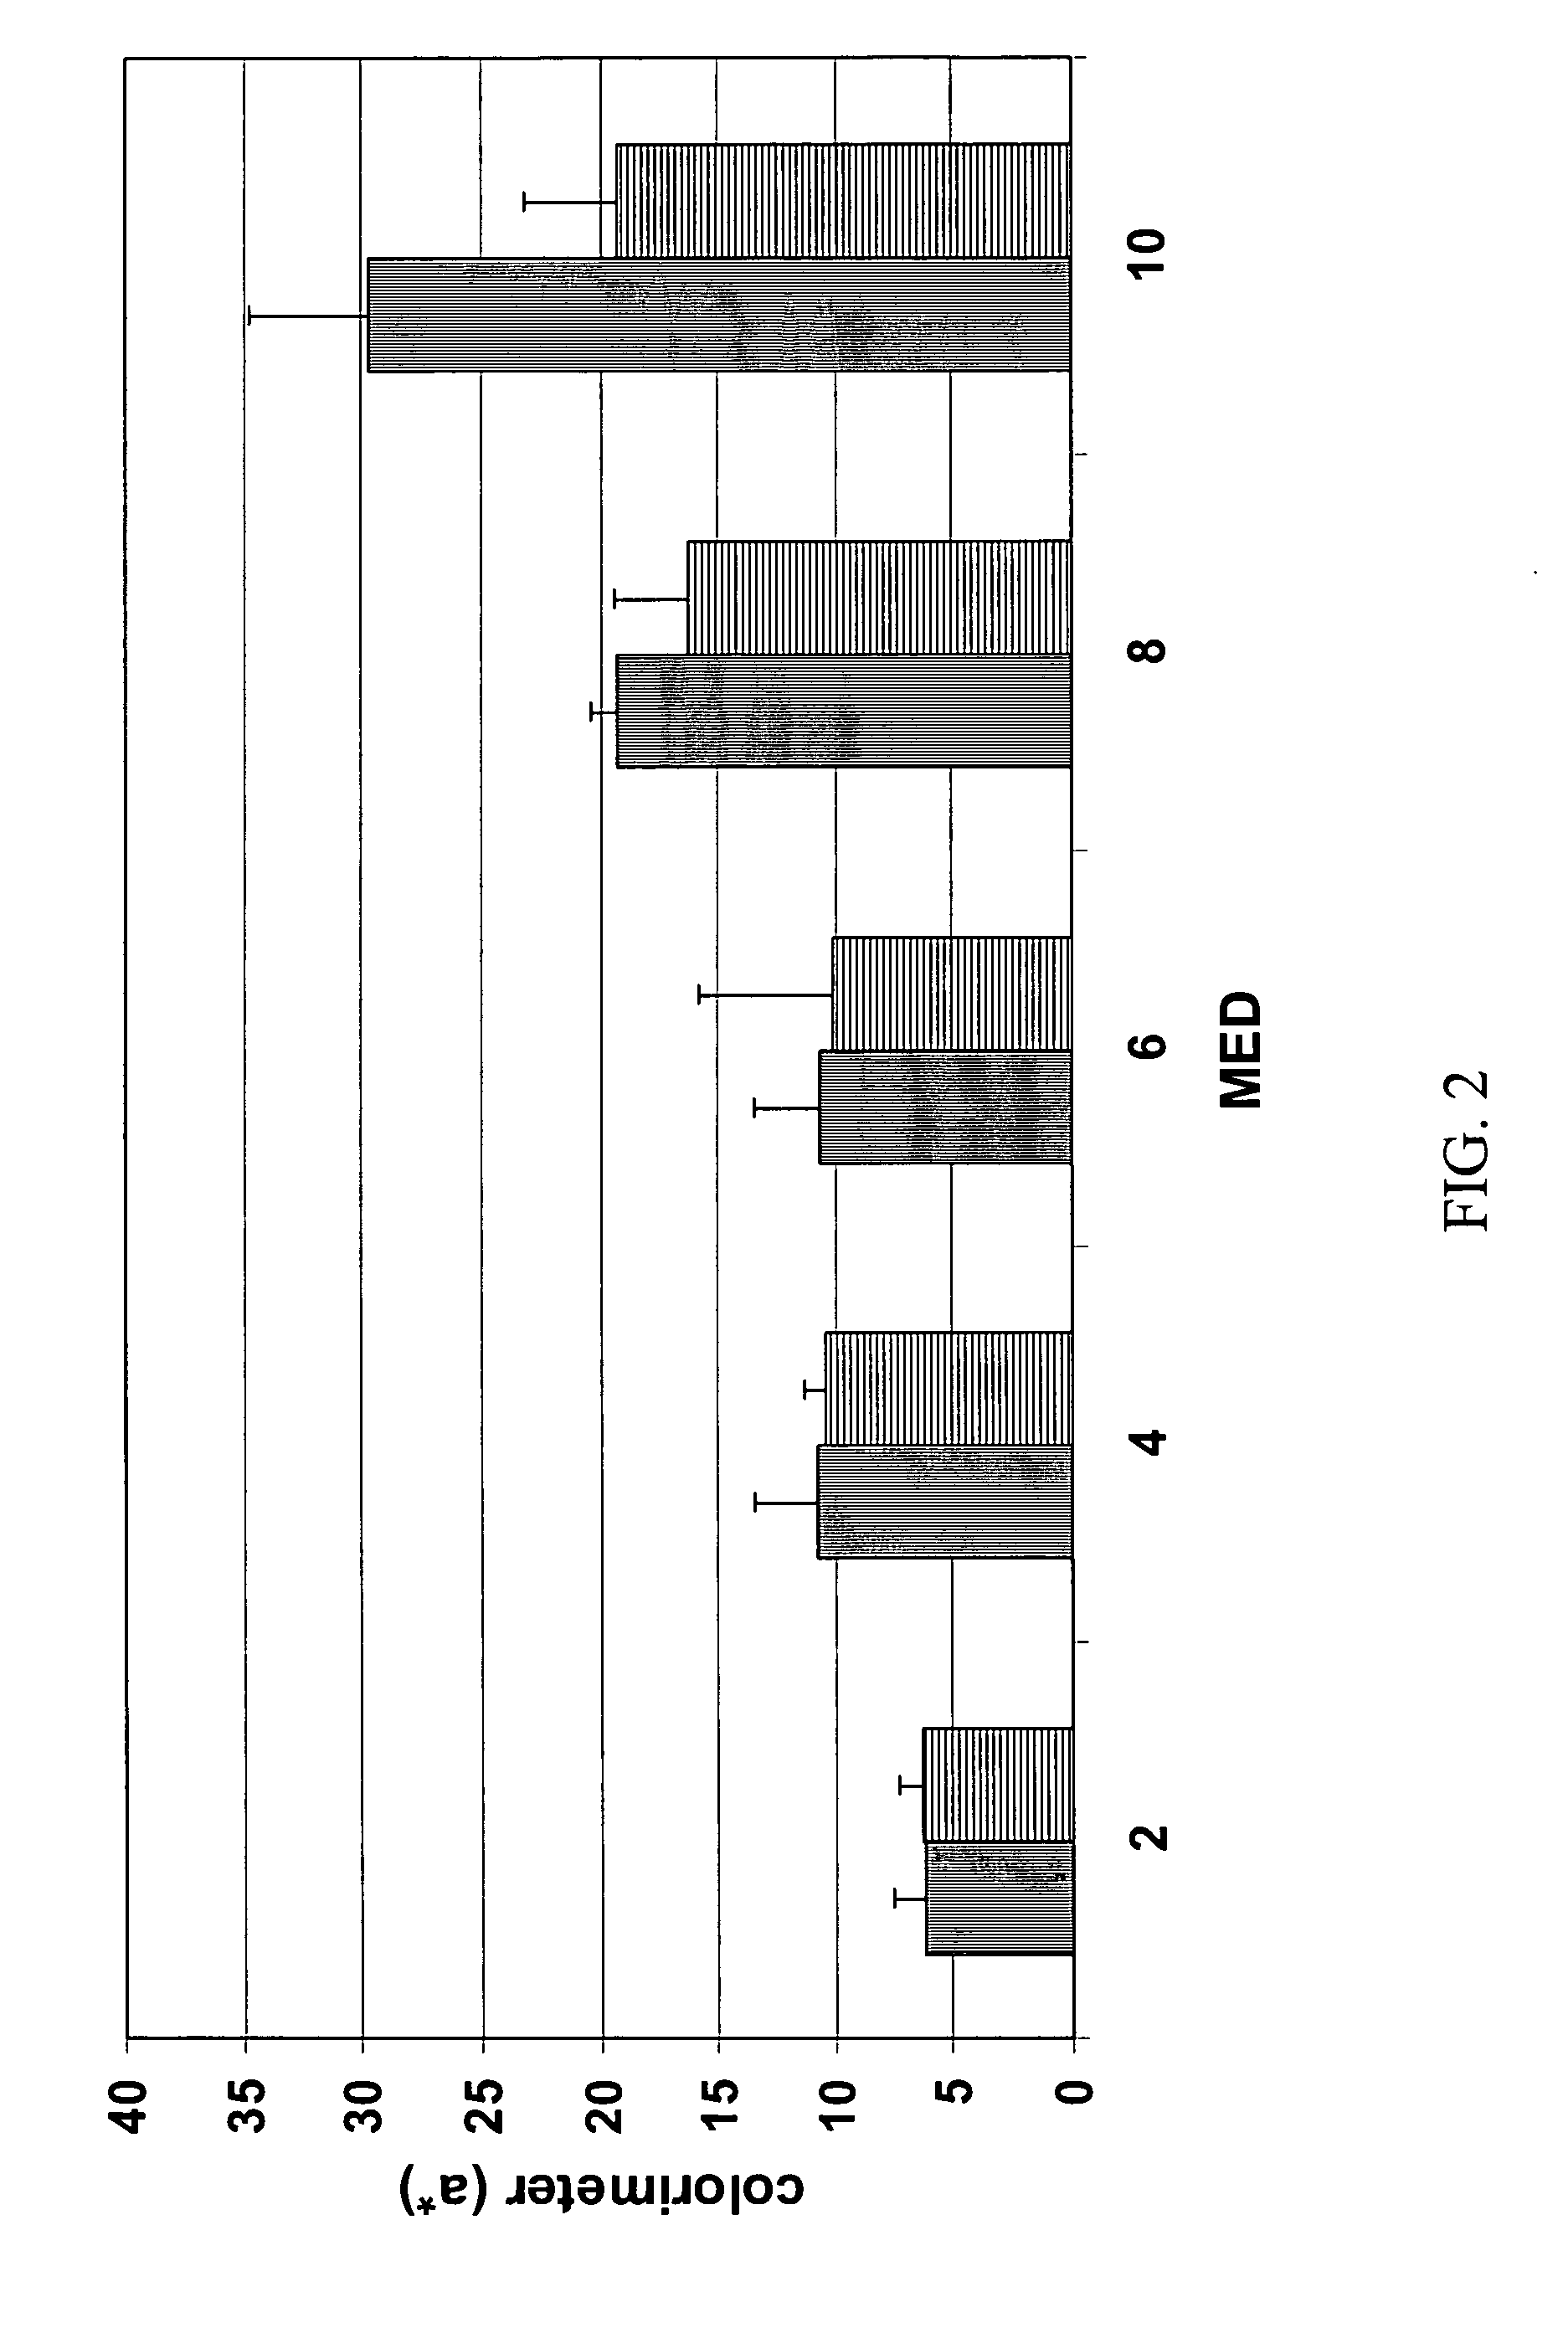 Stabilized ascorbic acid compositions and methods therefor